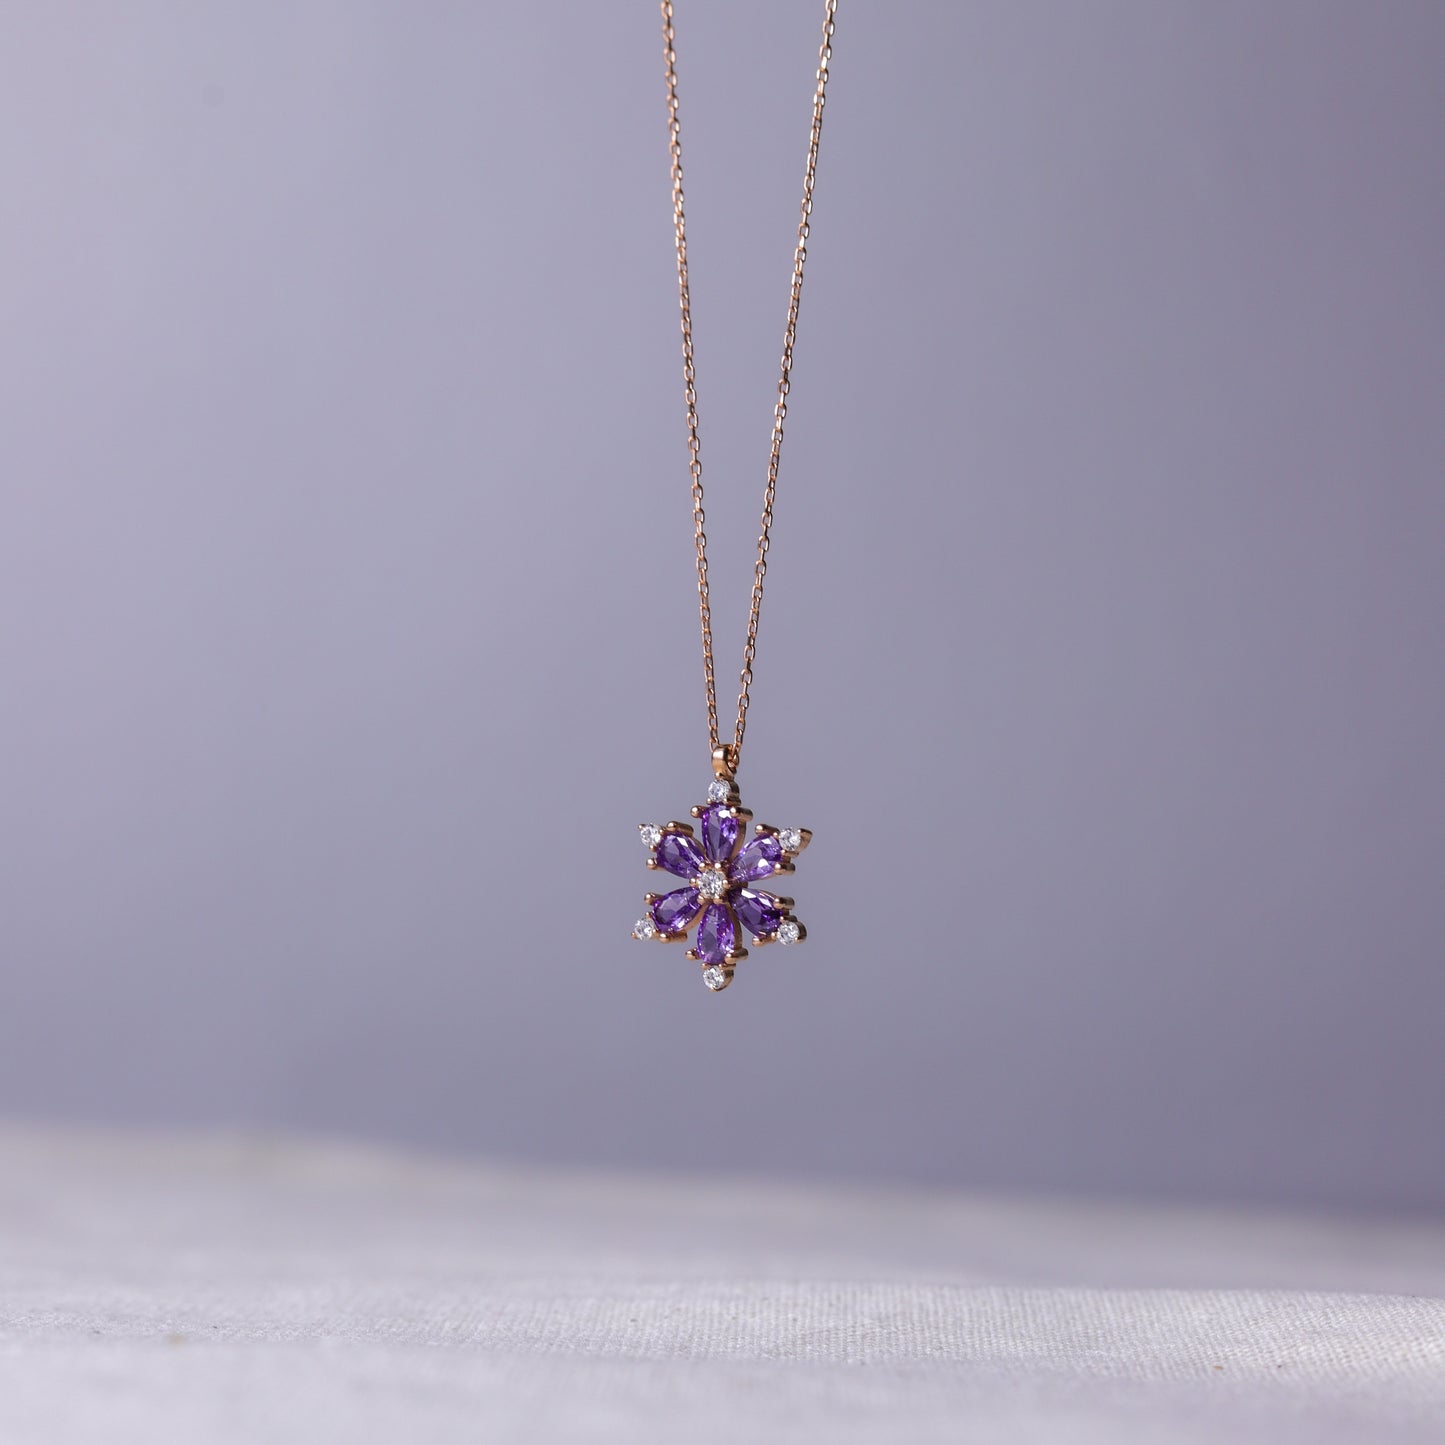 925 Sterling Silver Daisy Necklace with Amethyst Stone